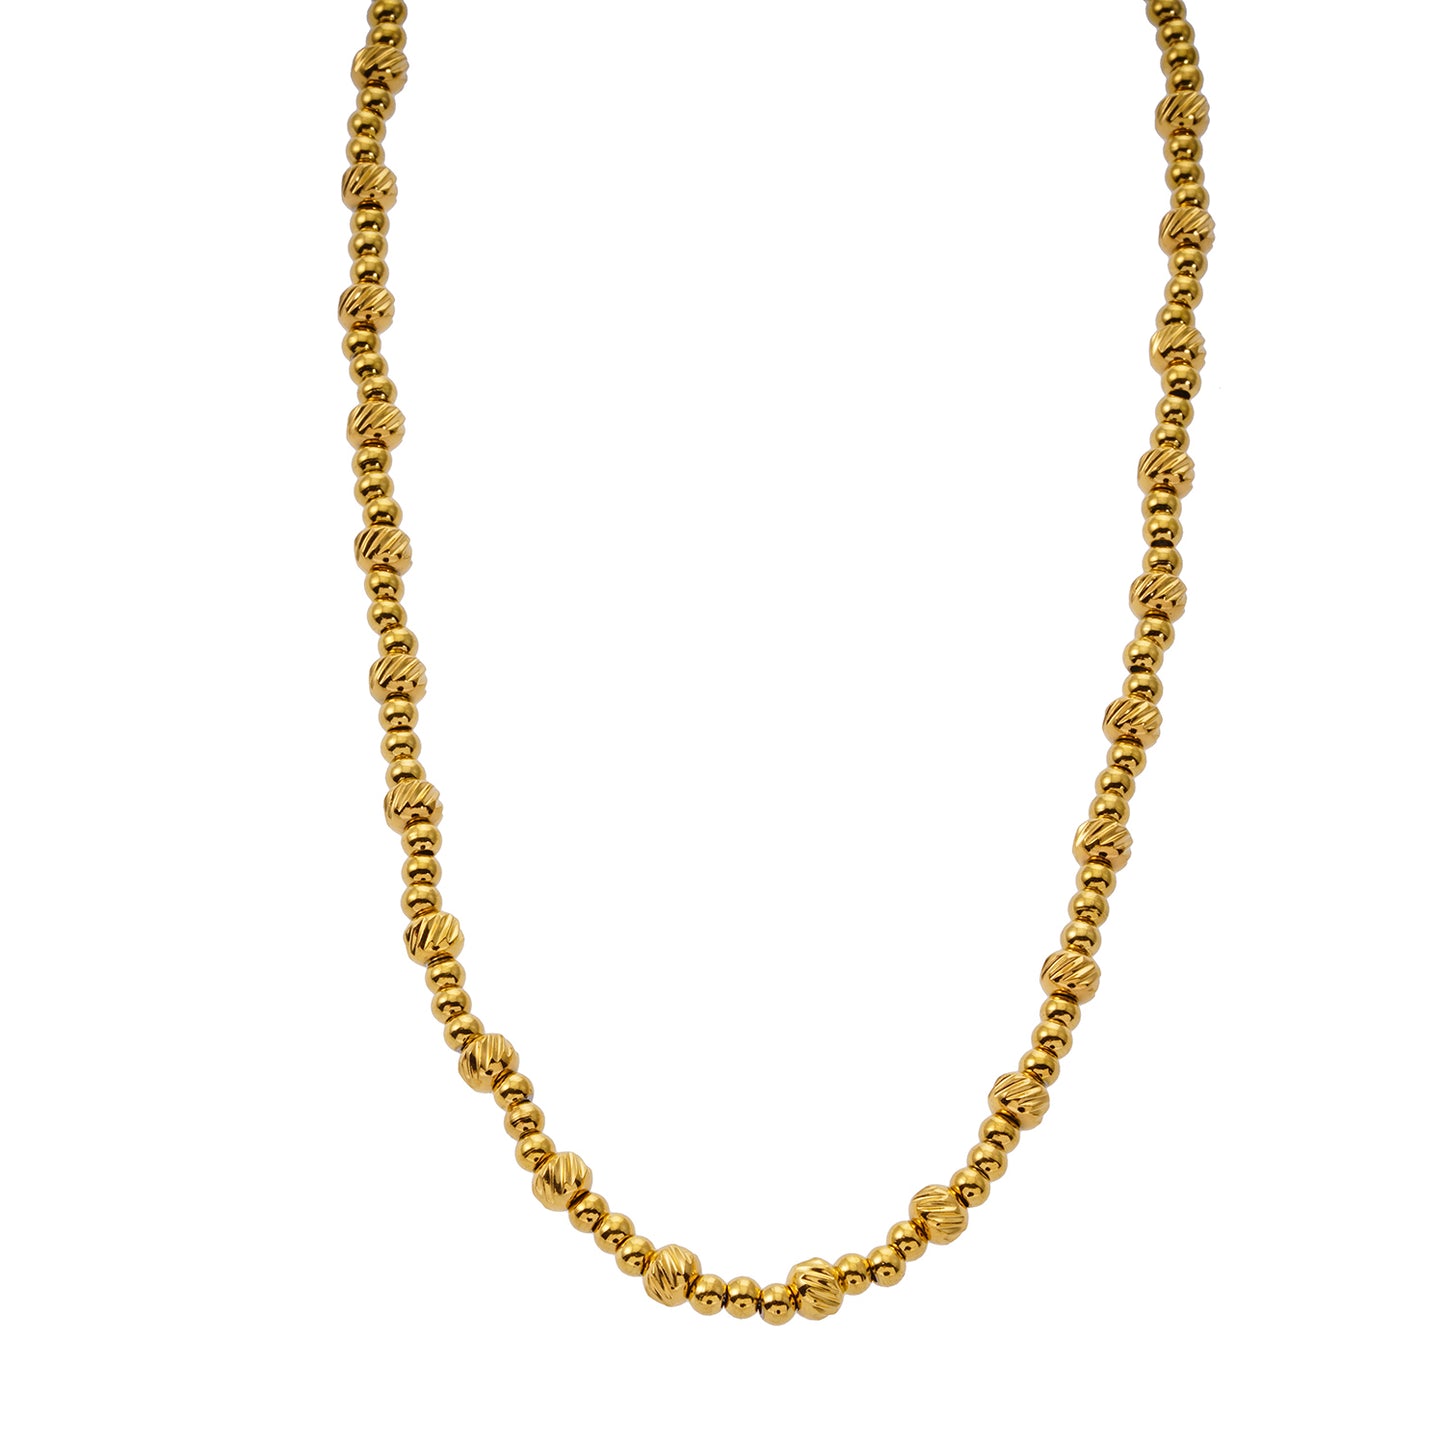 Style MILLIE 4469: Twin-Bead Fusion Gold Chain Necklace.